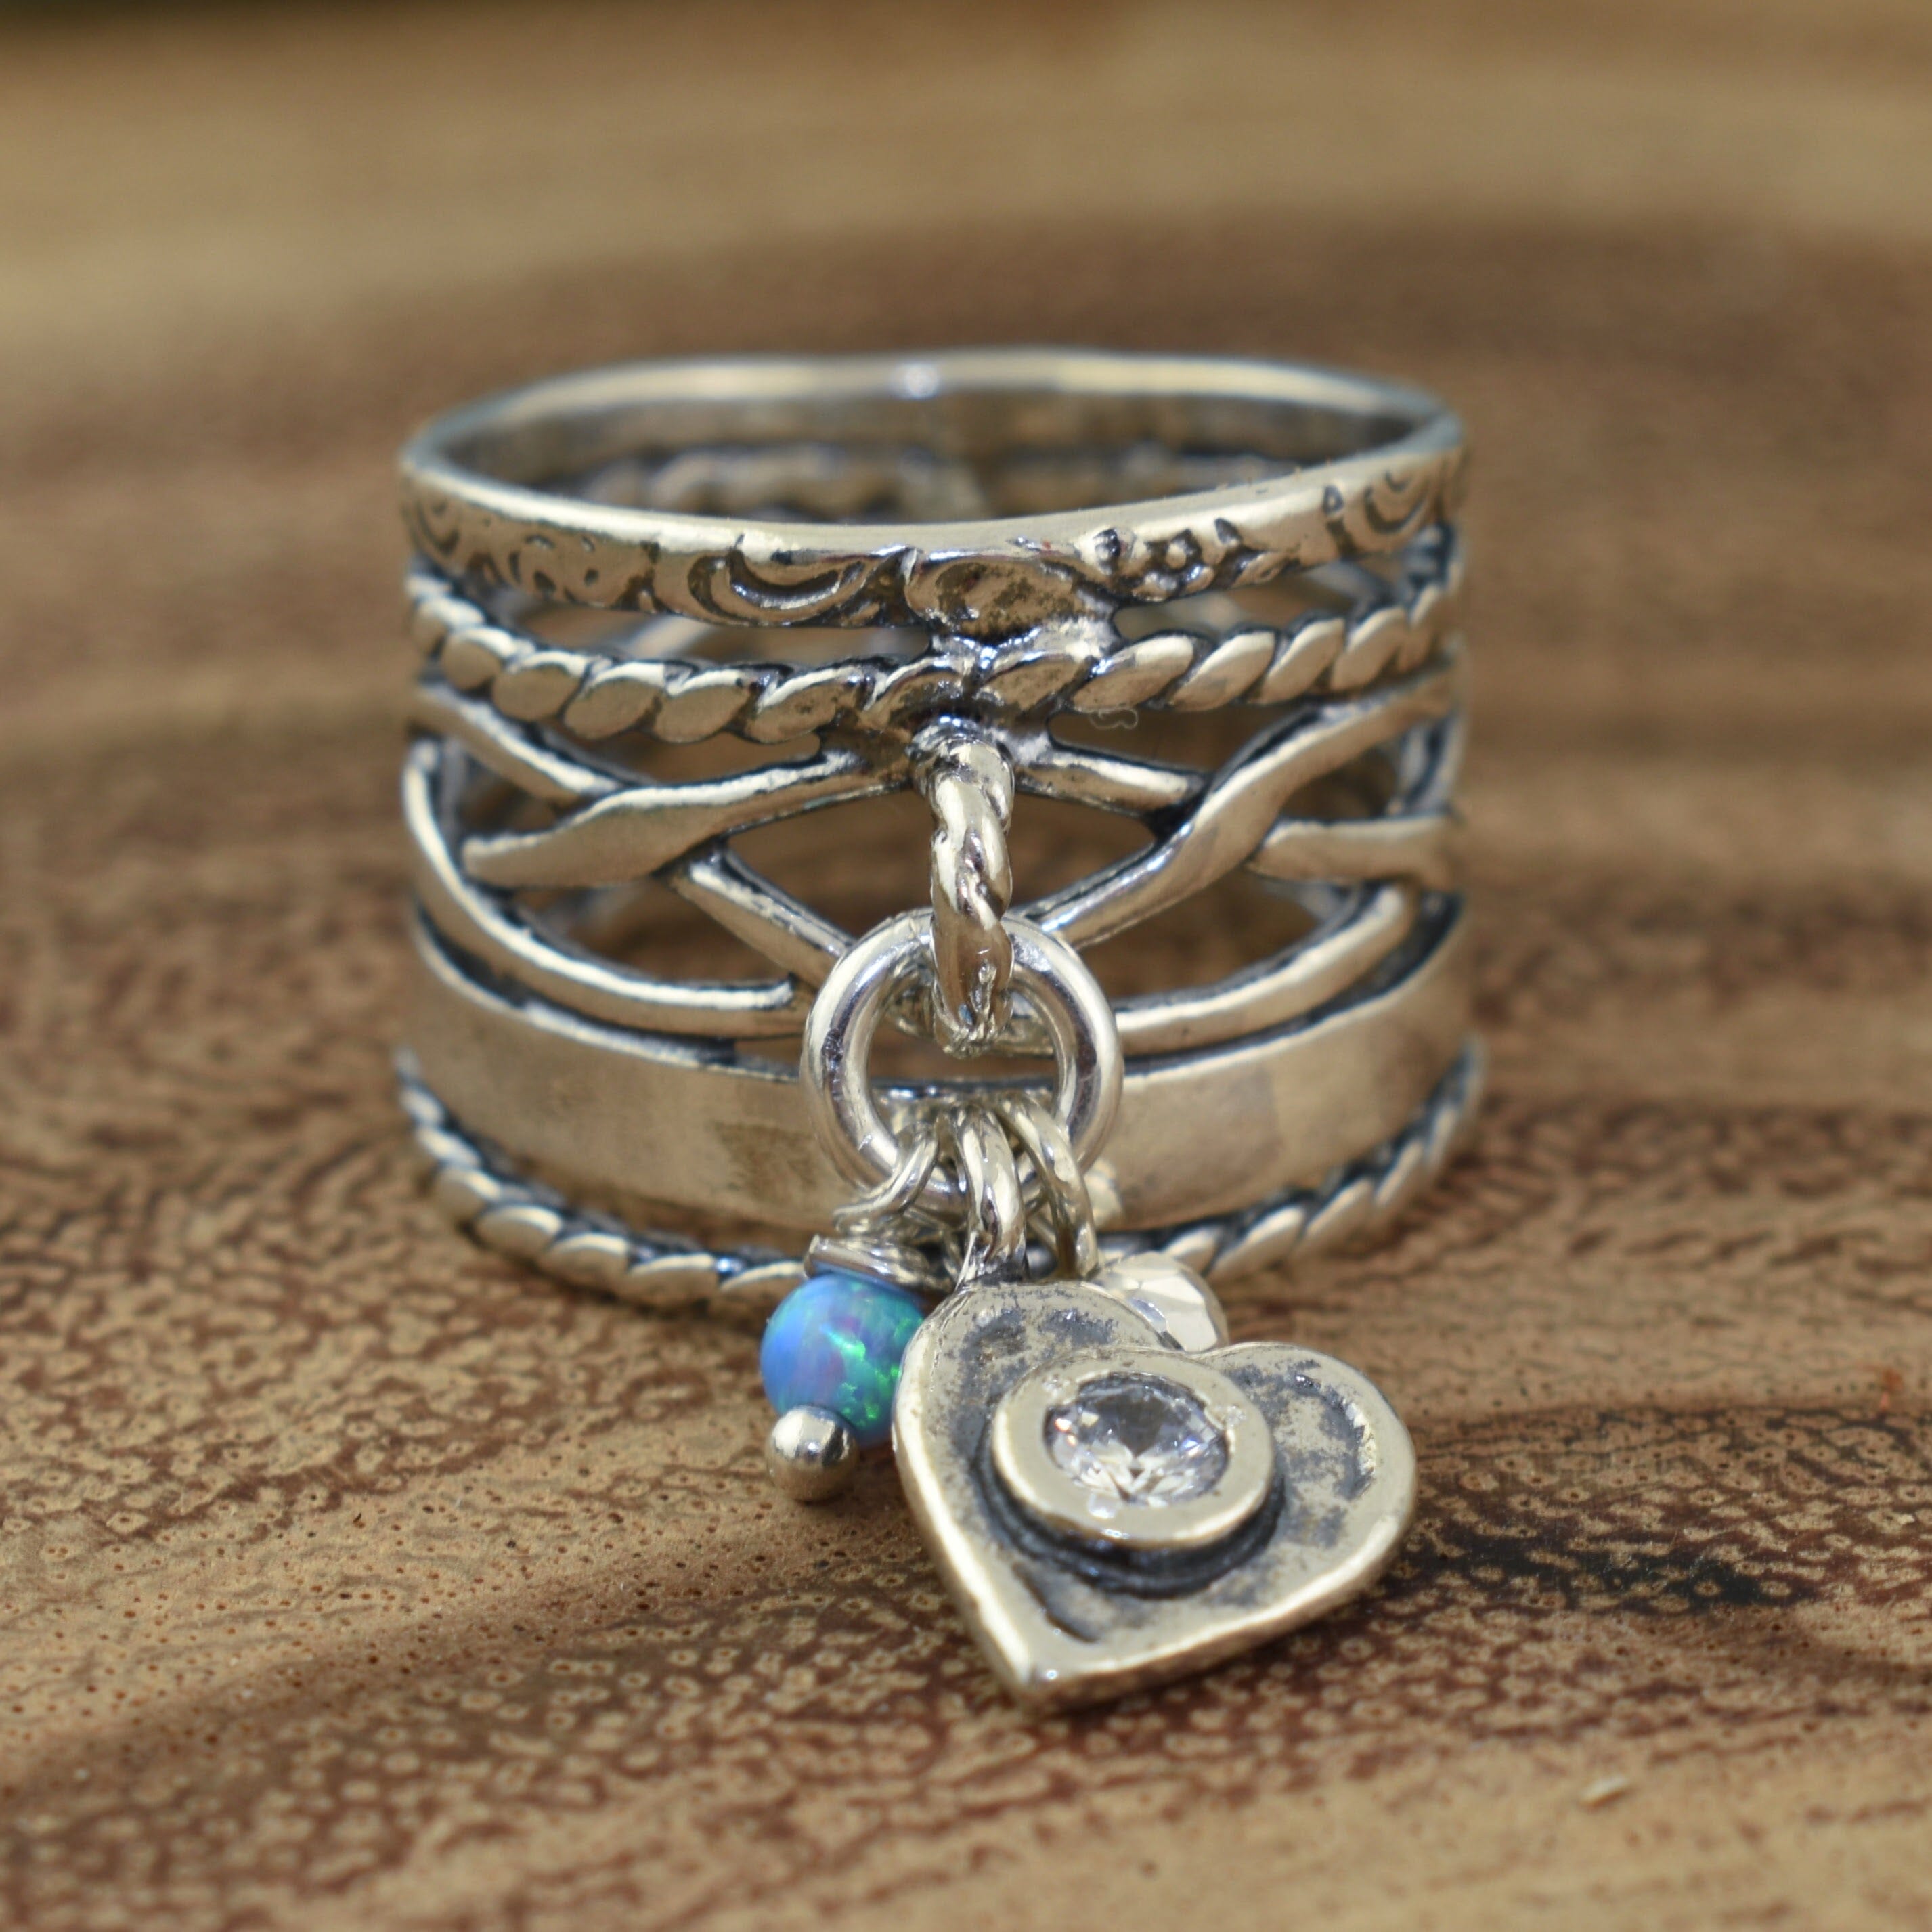 silver ring featuring a heart, opal, and silver bead elements